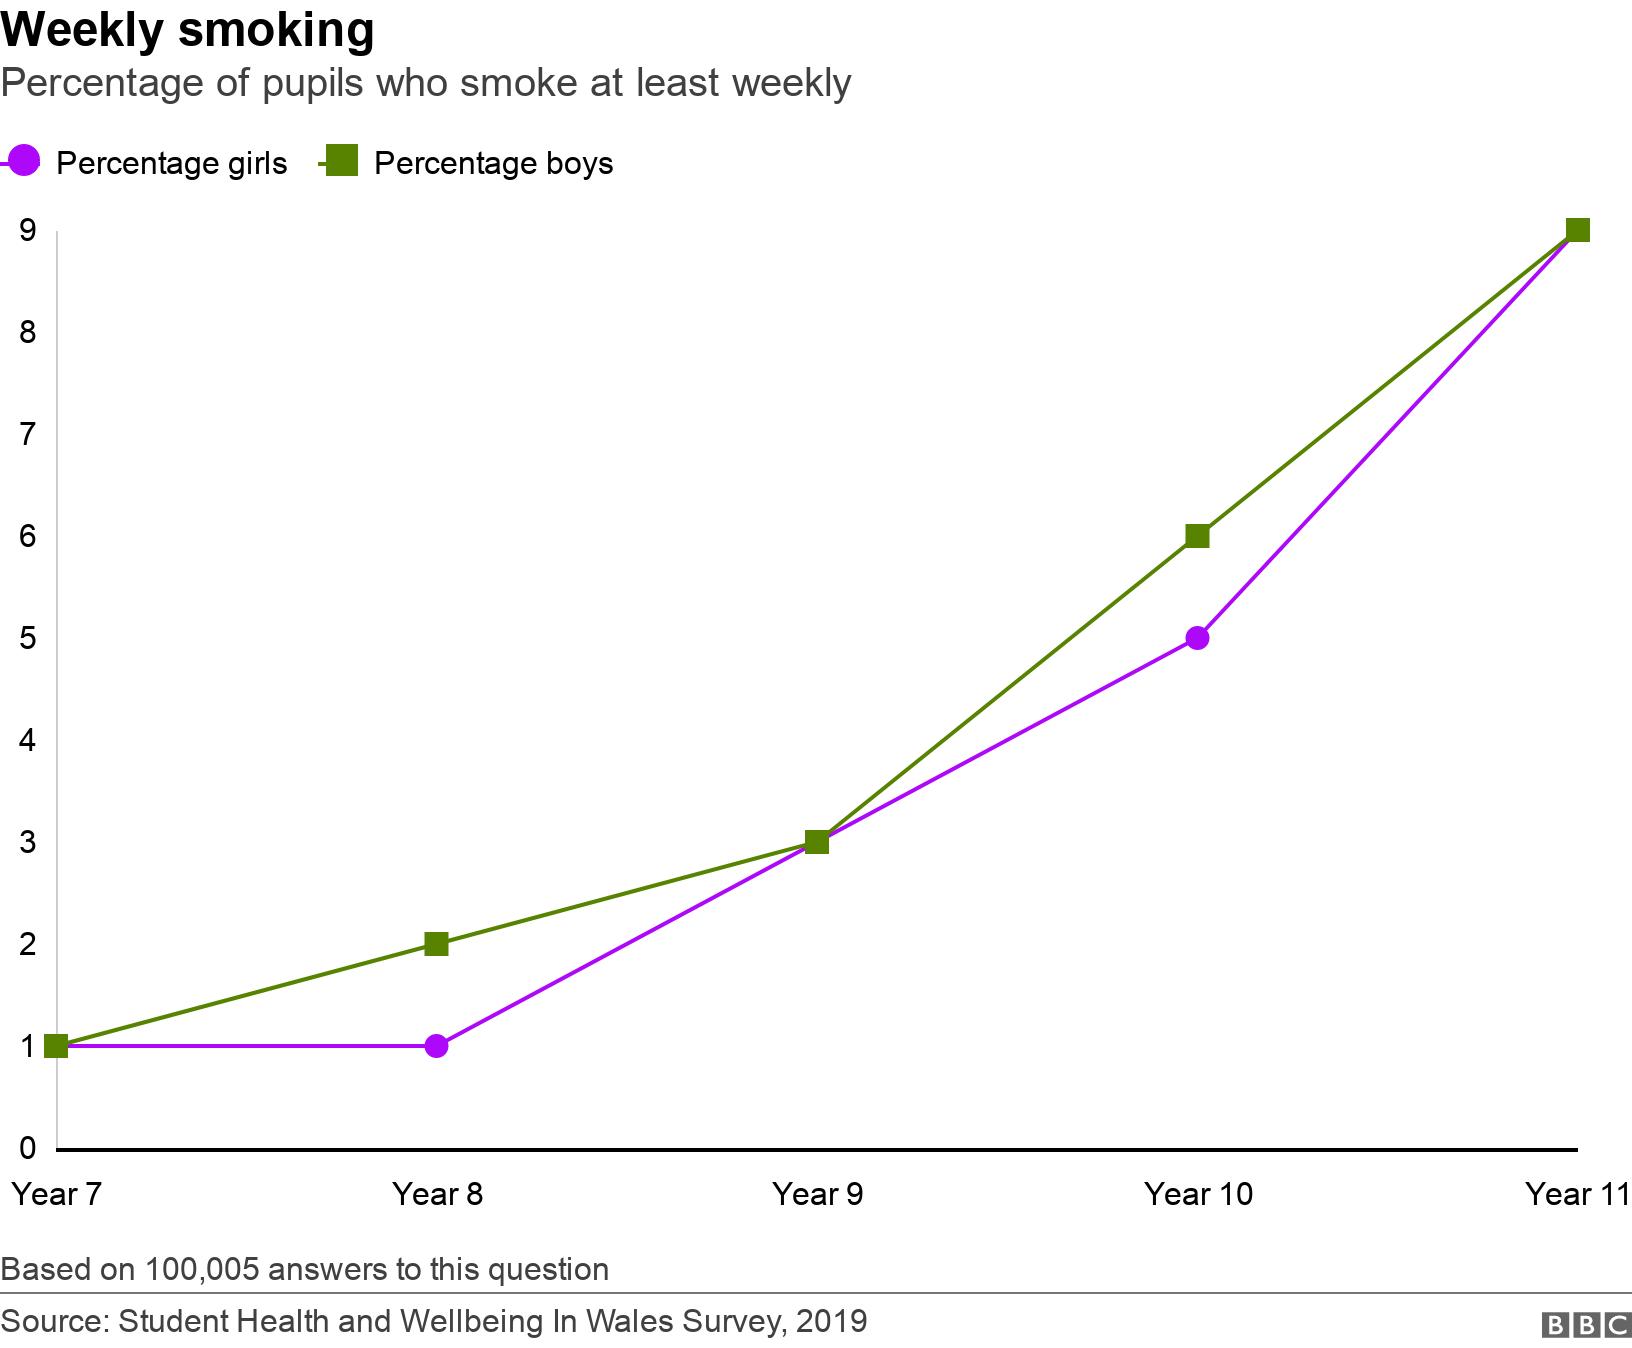 Weekly smoking. Percentage of pupils who smoke at least weekly. The percentage of pupils in Years 7-11 who smoke at least weekly, based on the Student Health and Wellbeing in Wales Survey, 2019 Based on 100,005 answers to this question.